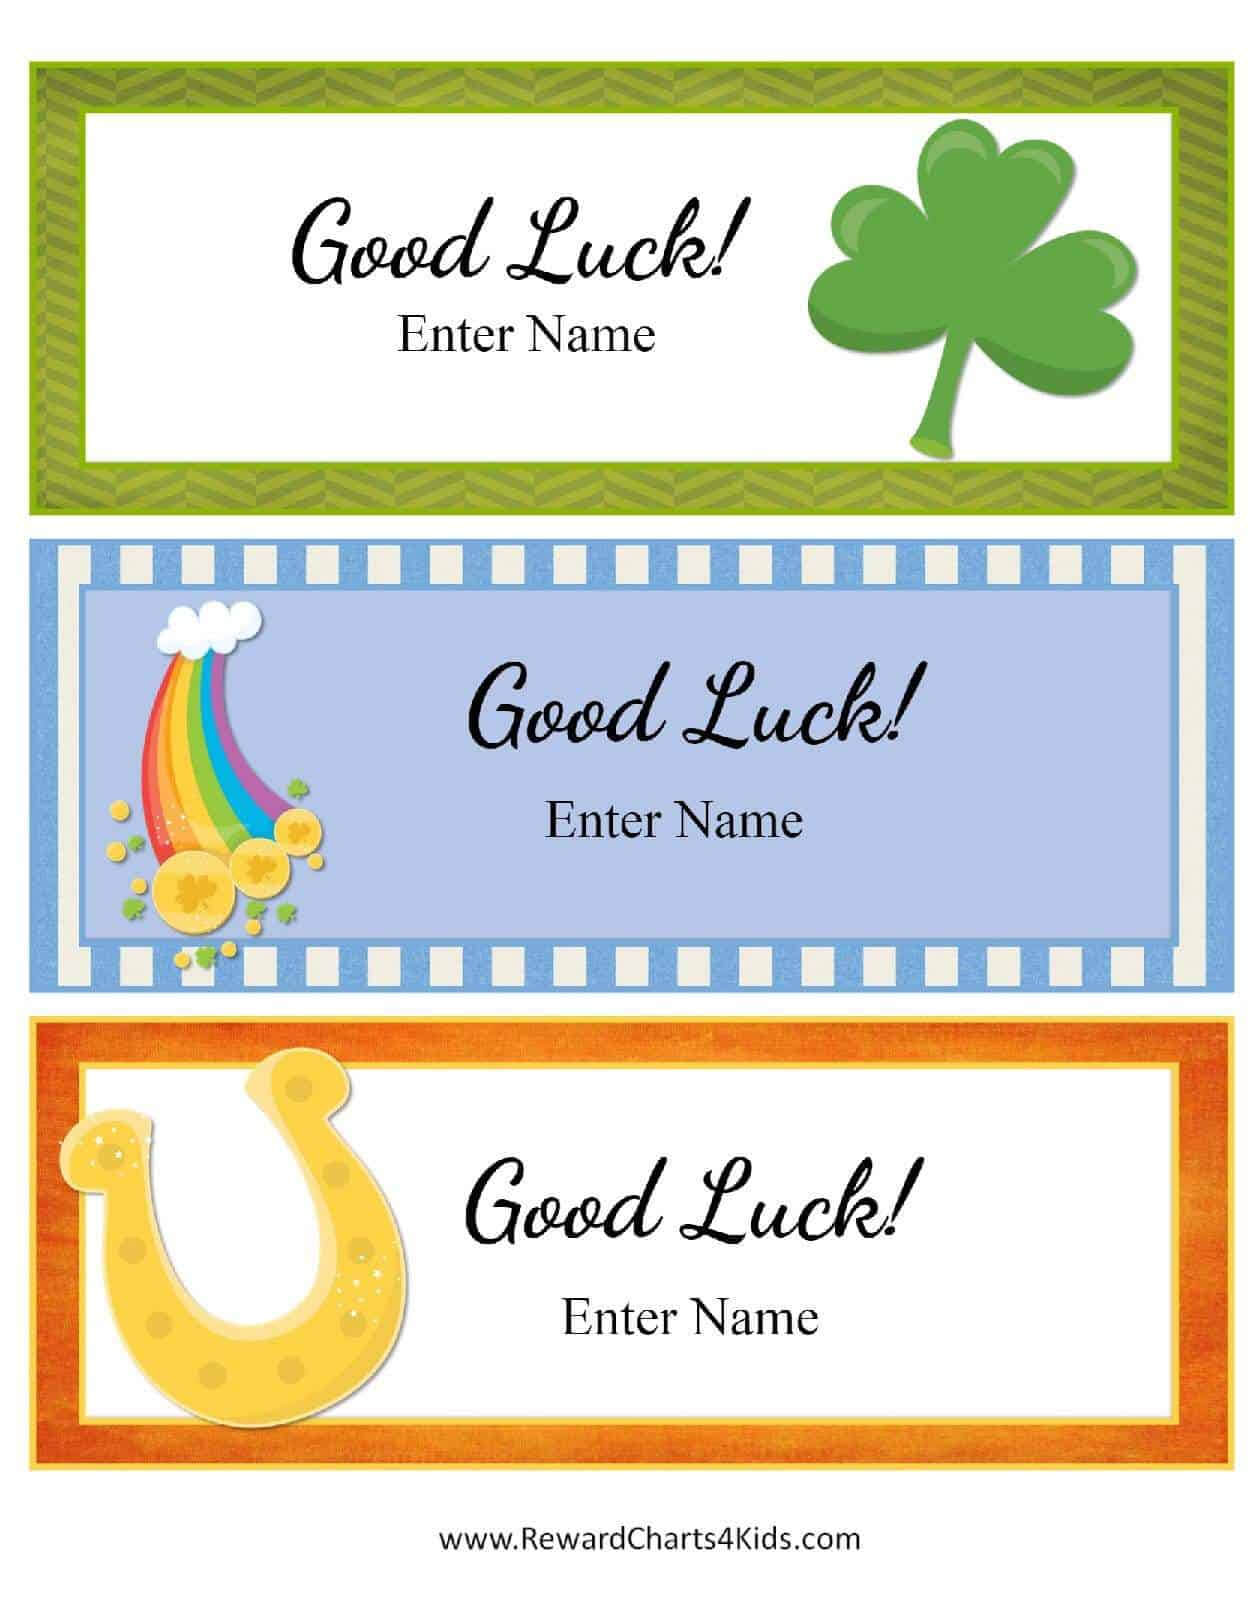 Free Good Luck Cards For Kids | Customize Online & Print At Home Pertaining To Good Luck Card Template